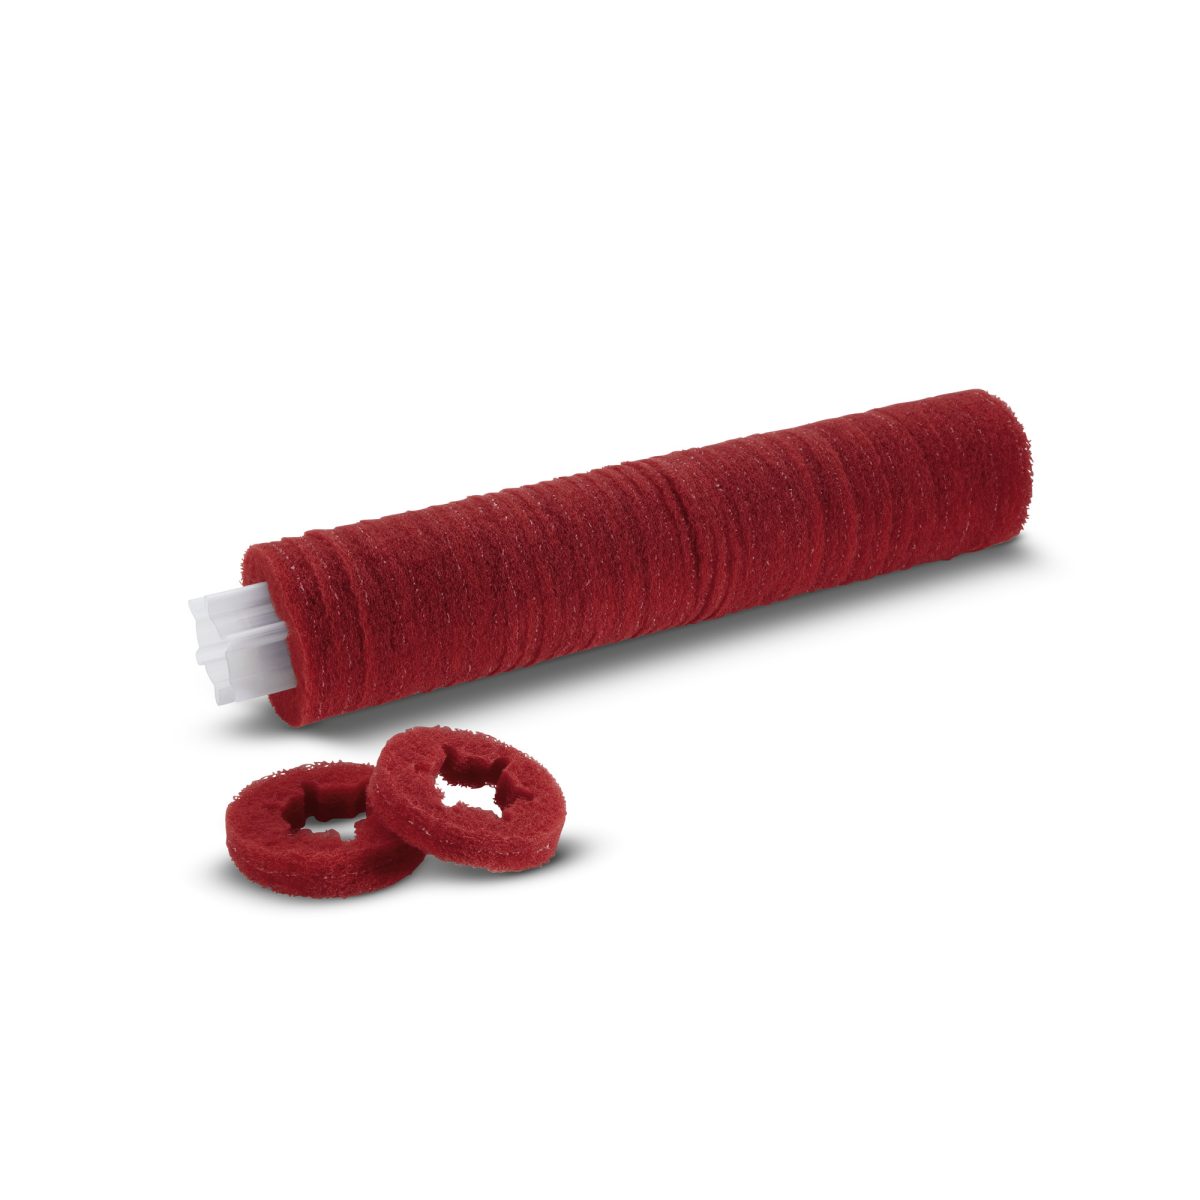 Roller Pad Sleeve, Medium, Red, for BR 40/10